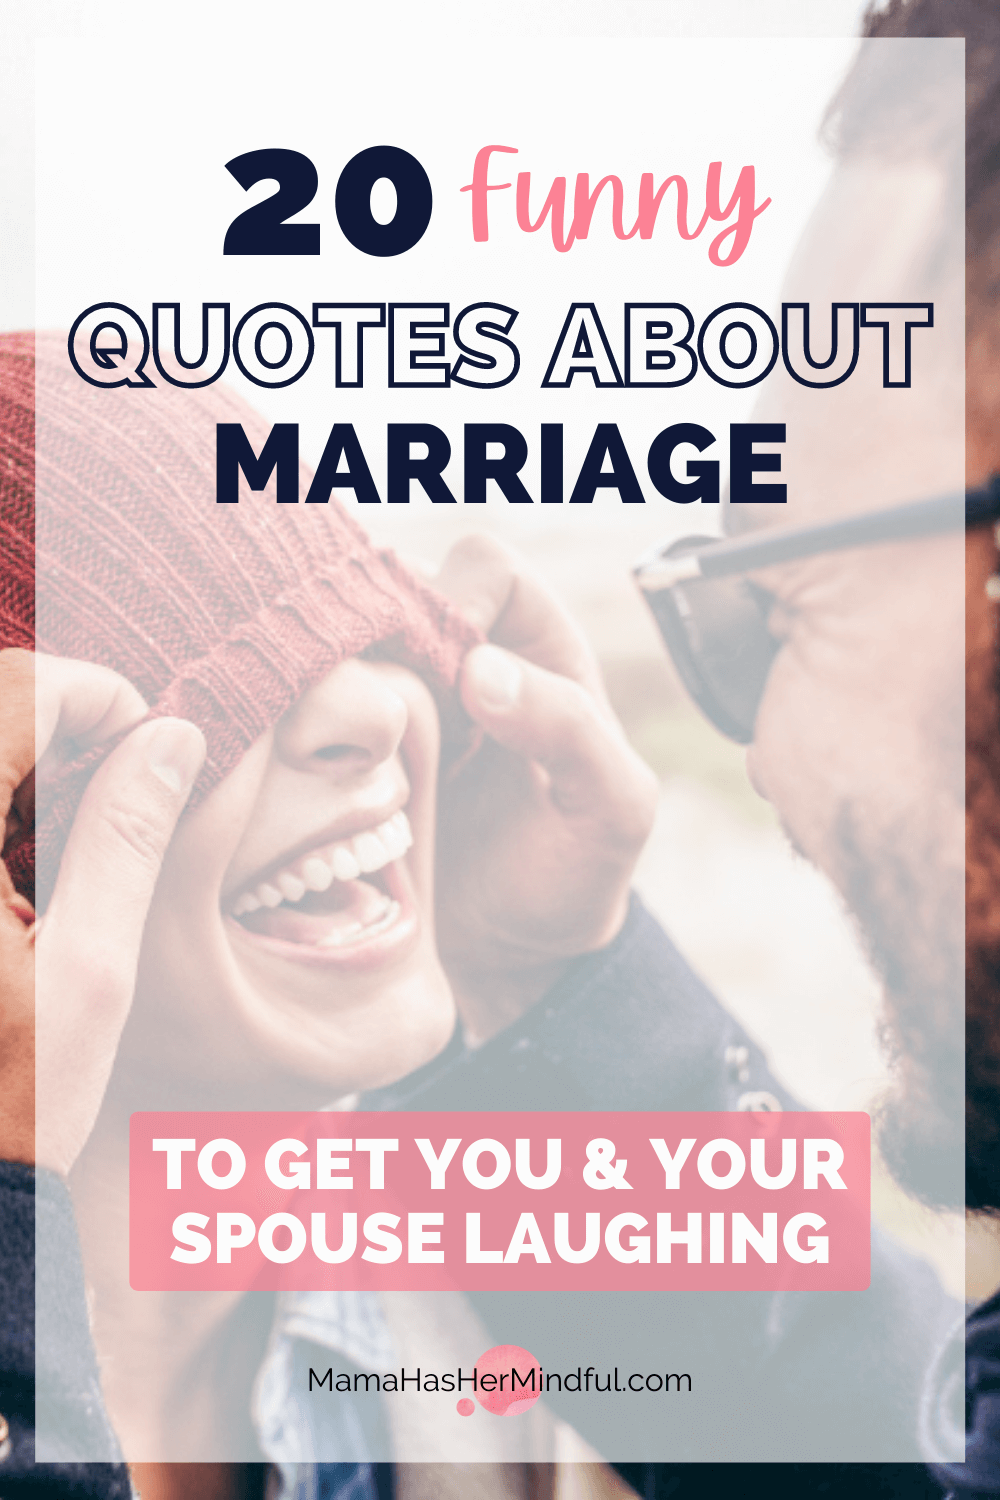 20 Funny Marriage Quotes that Will Get Both Spouses Laughing